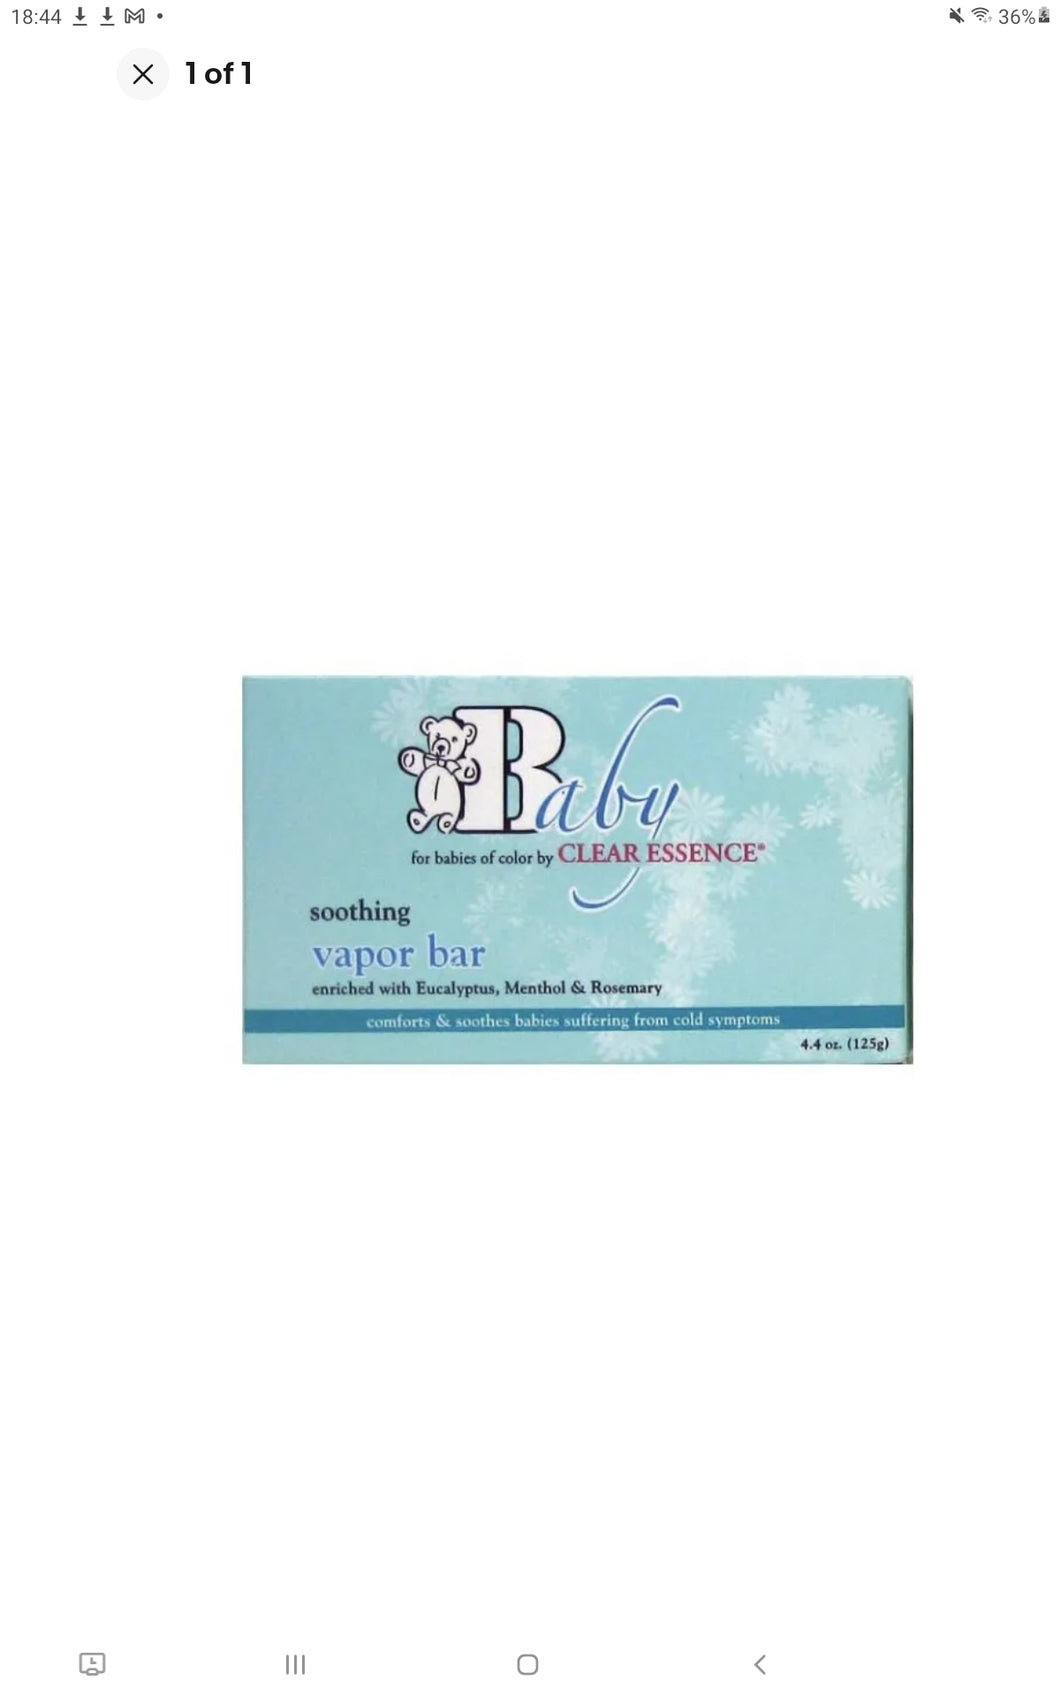 Baby CLEAR ESSENCE for babies of color by soothing vapor bar